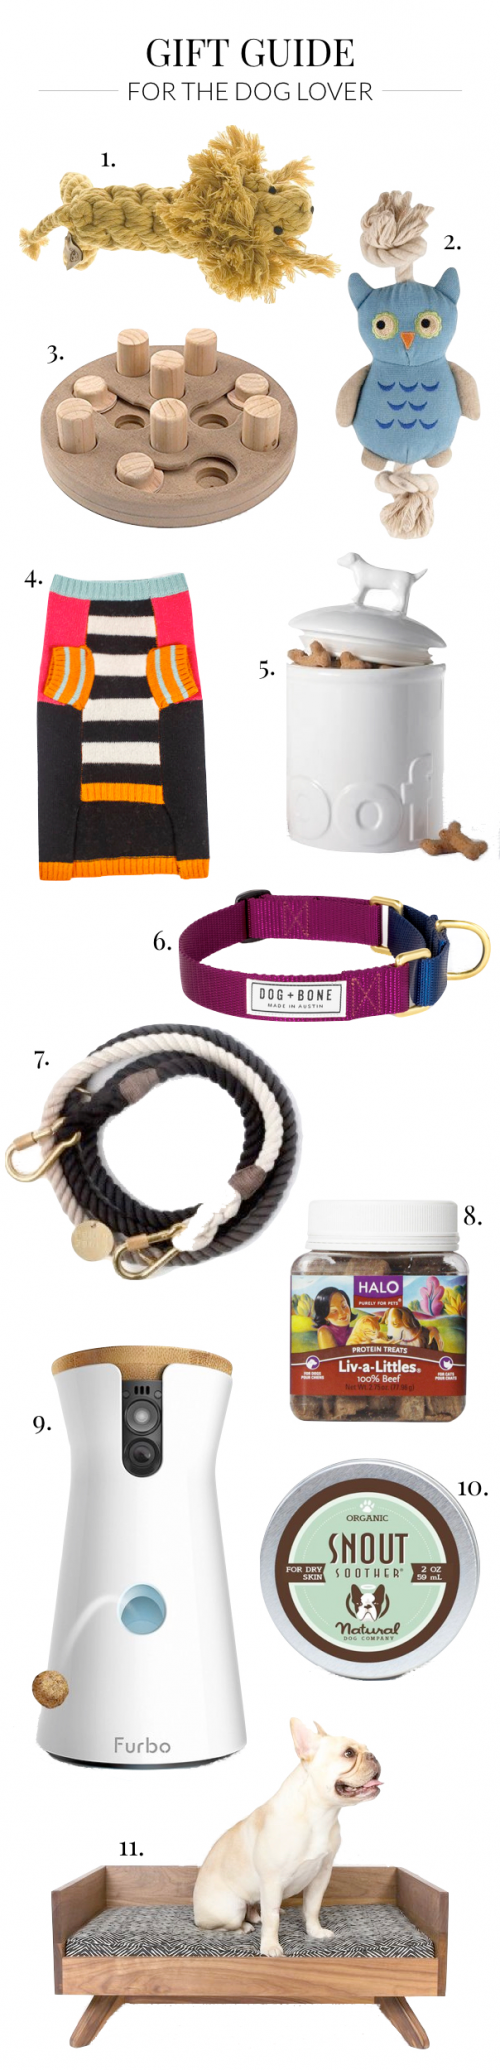 2016 Holiday Gift Guide: Dog Lover | Pulp Design Studios